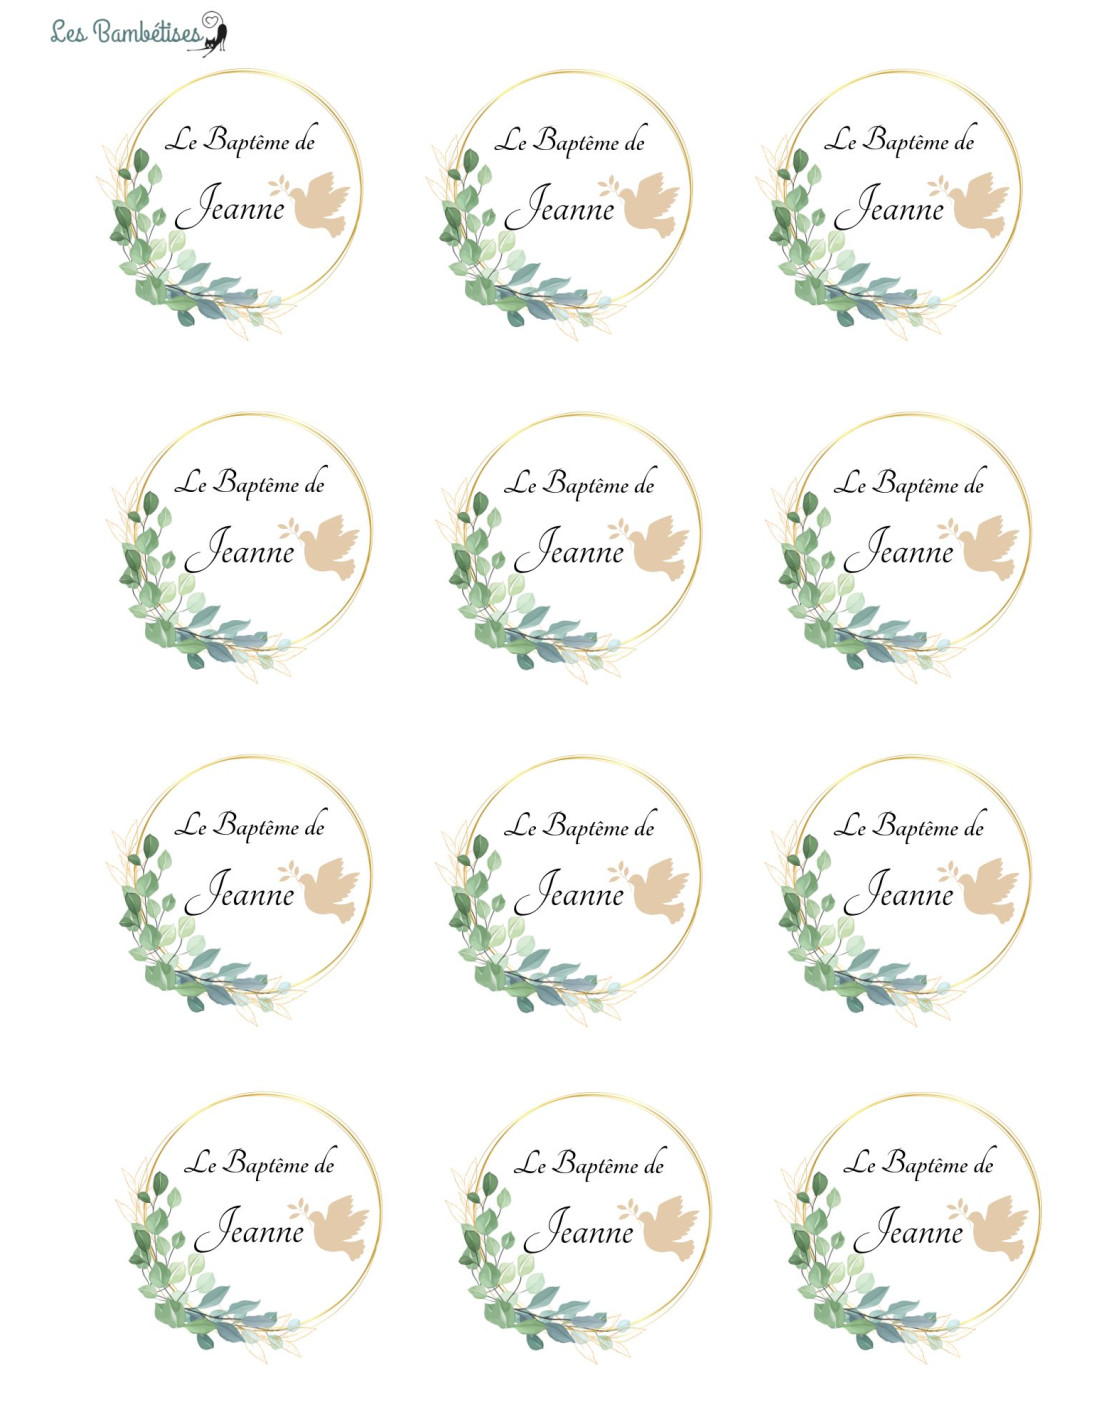 Stickers autocollant Mariage pas cher •.¸¸ FRANCE STICKERS¸¸.•